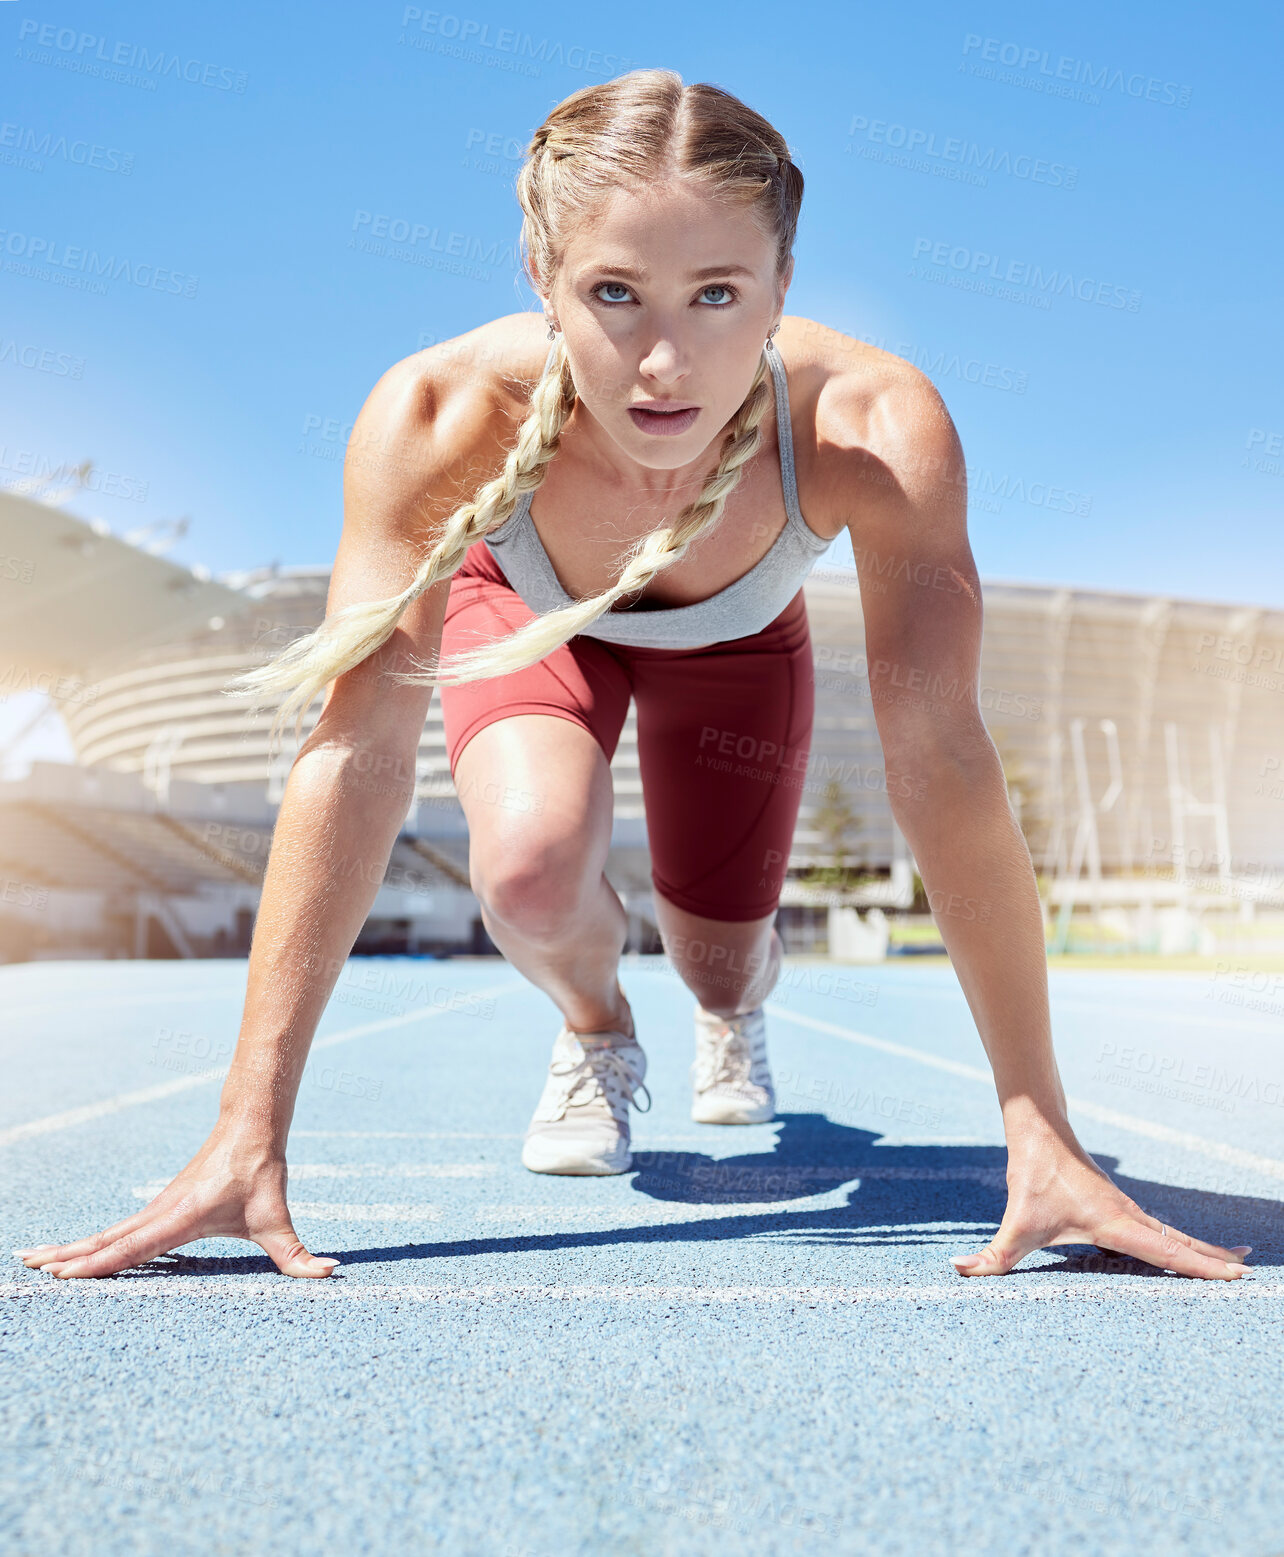 Buy stock photo Serious female athlete at the starting line in a track race competition at the stadium. Fit sportswoman mentally and physically prepared to start running at the sprint line or starting block